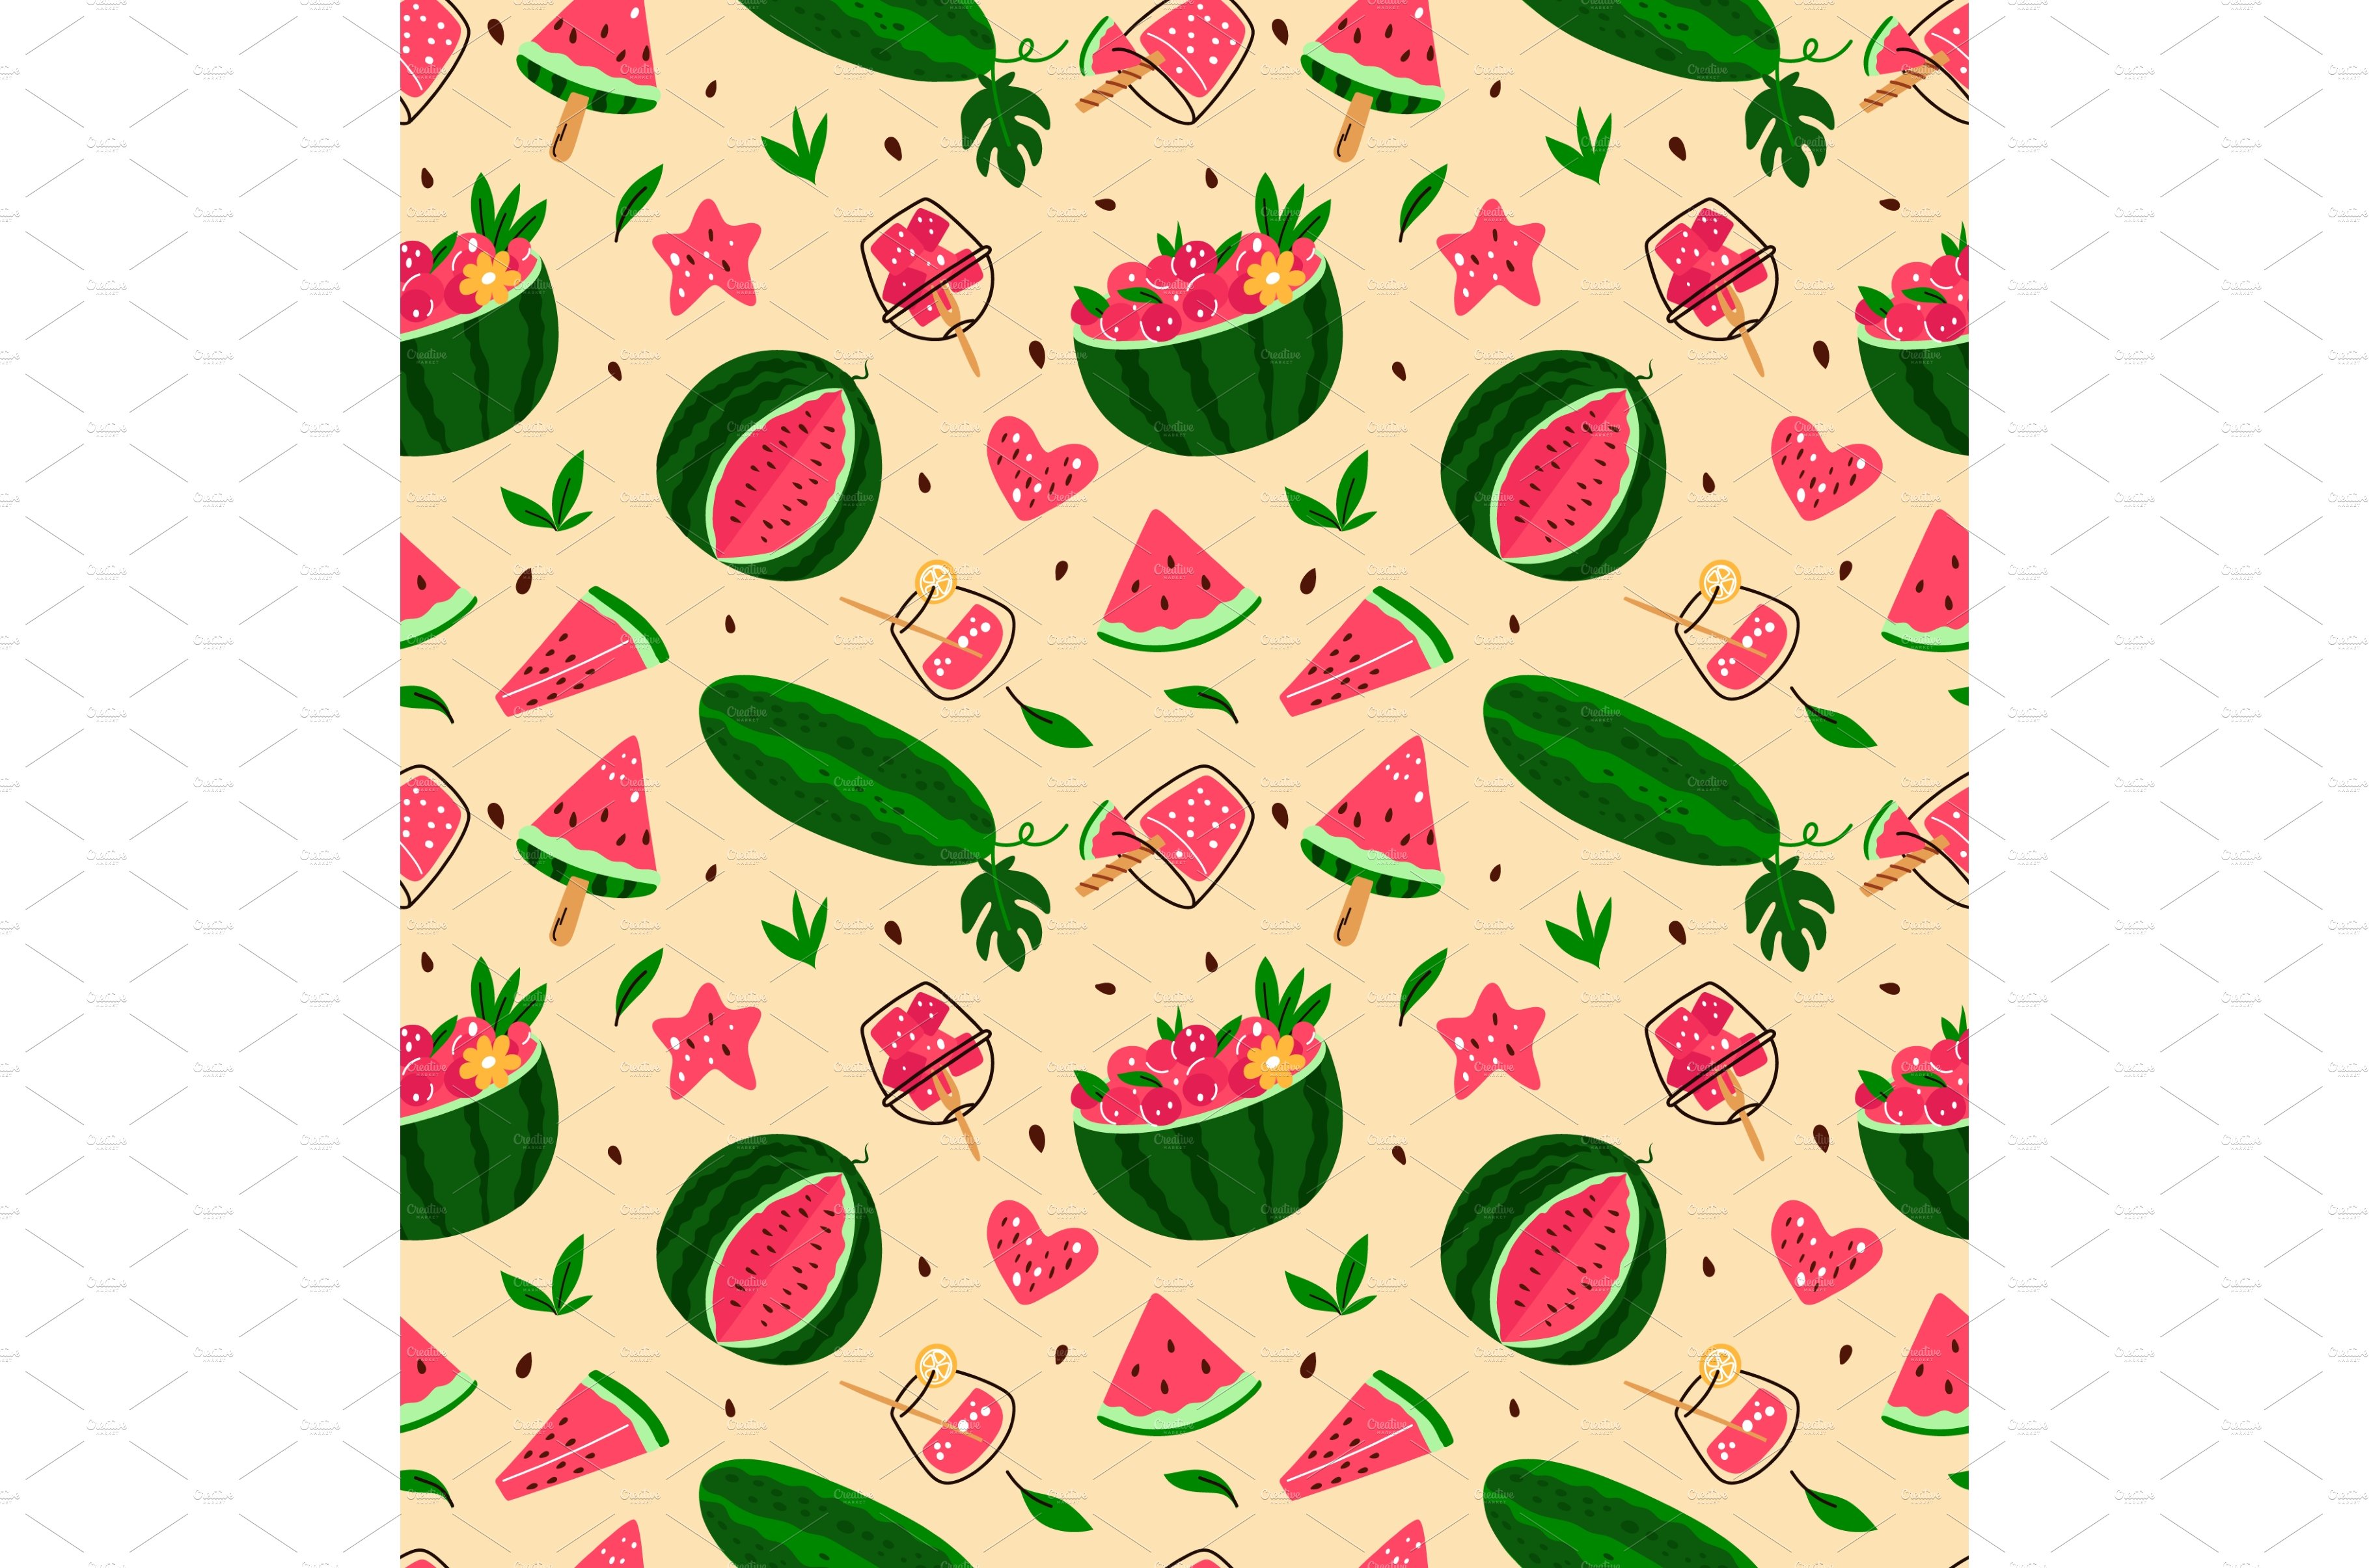 Watermelon seamless pattern. Bright cover image.